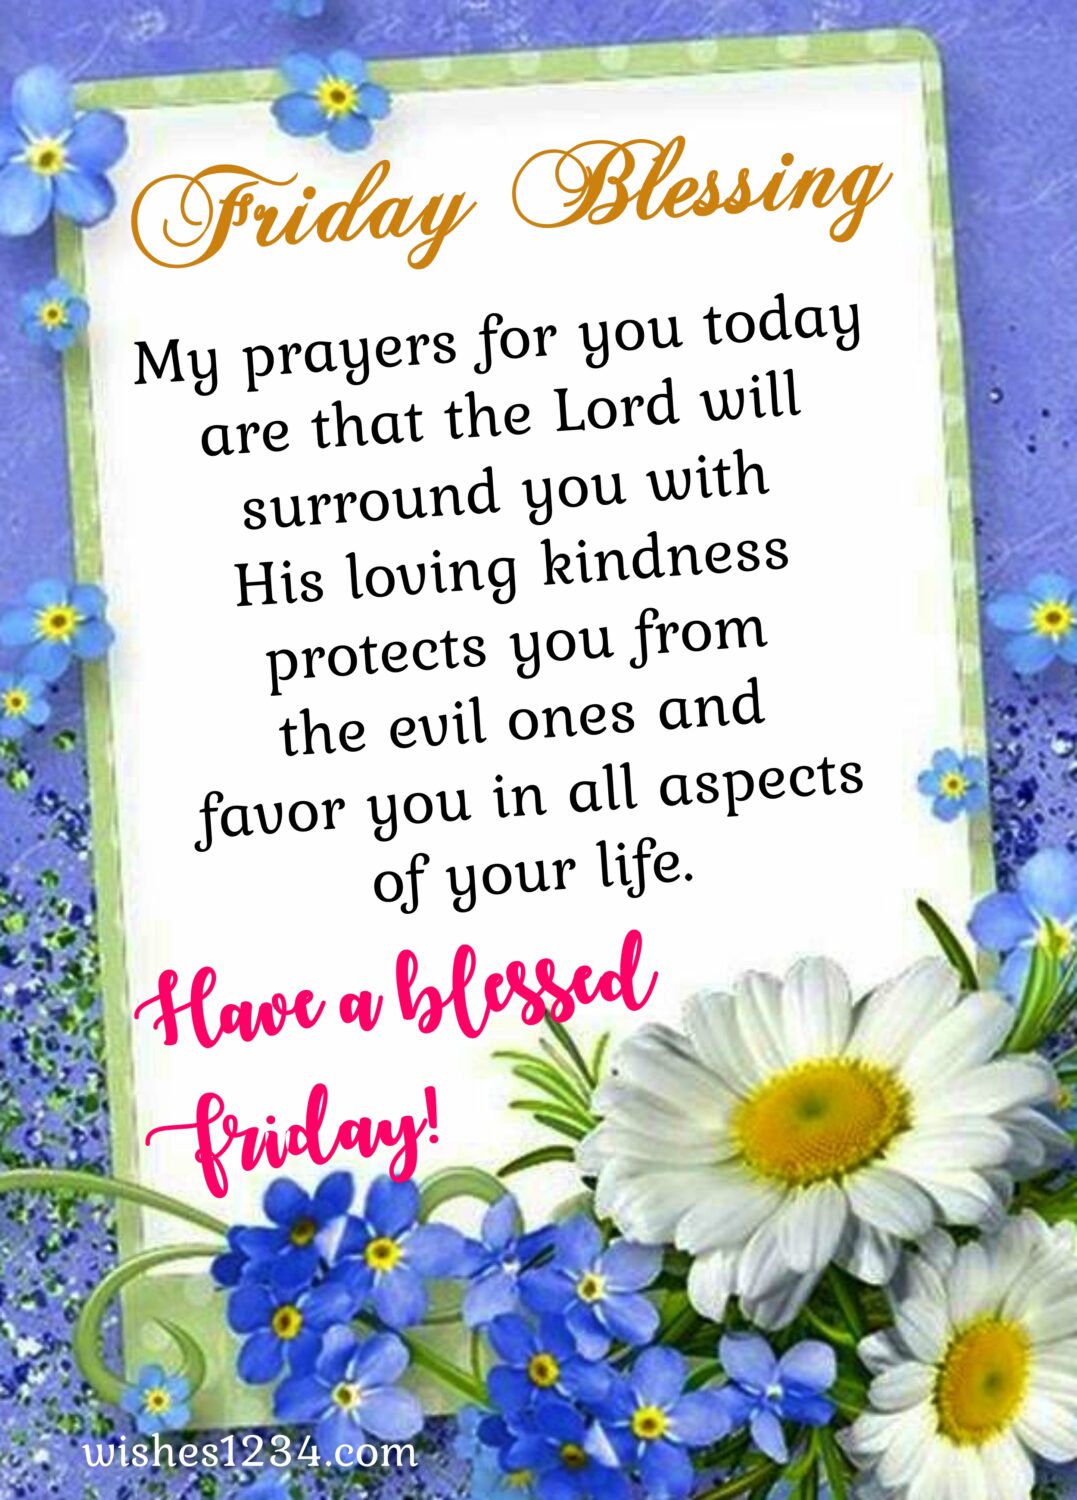 Friday blessing card with white daisy flower, Happy Friday images.